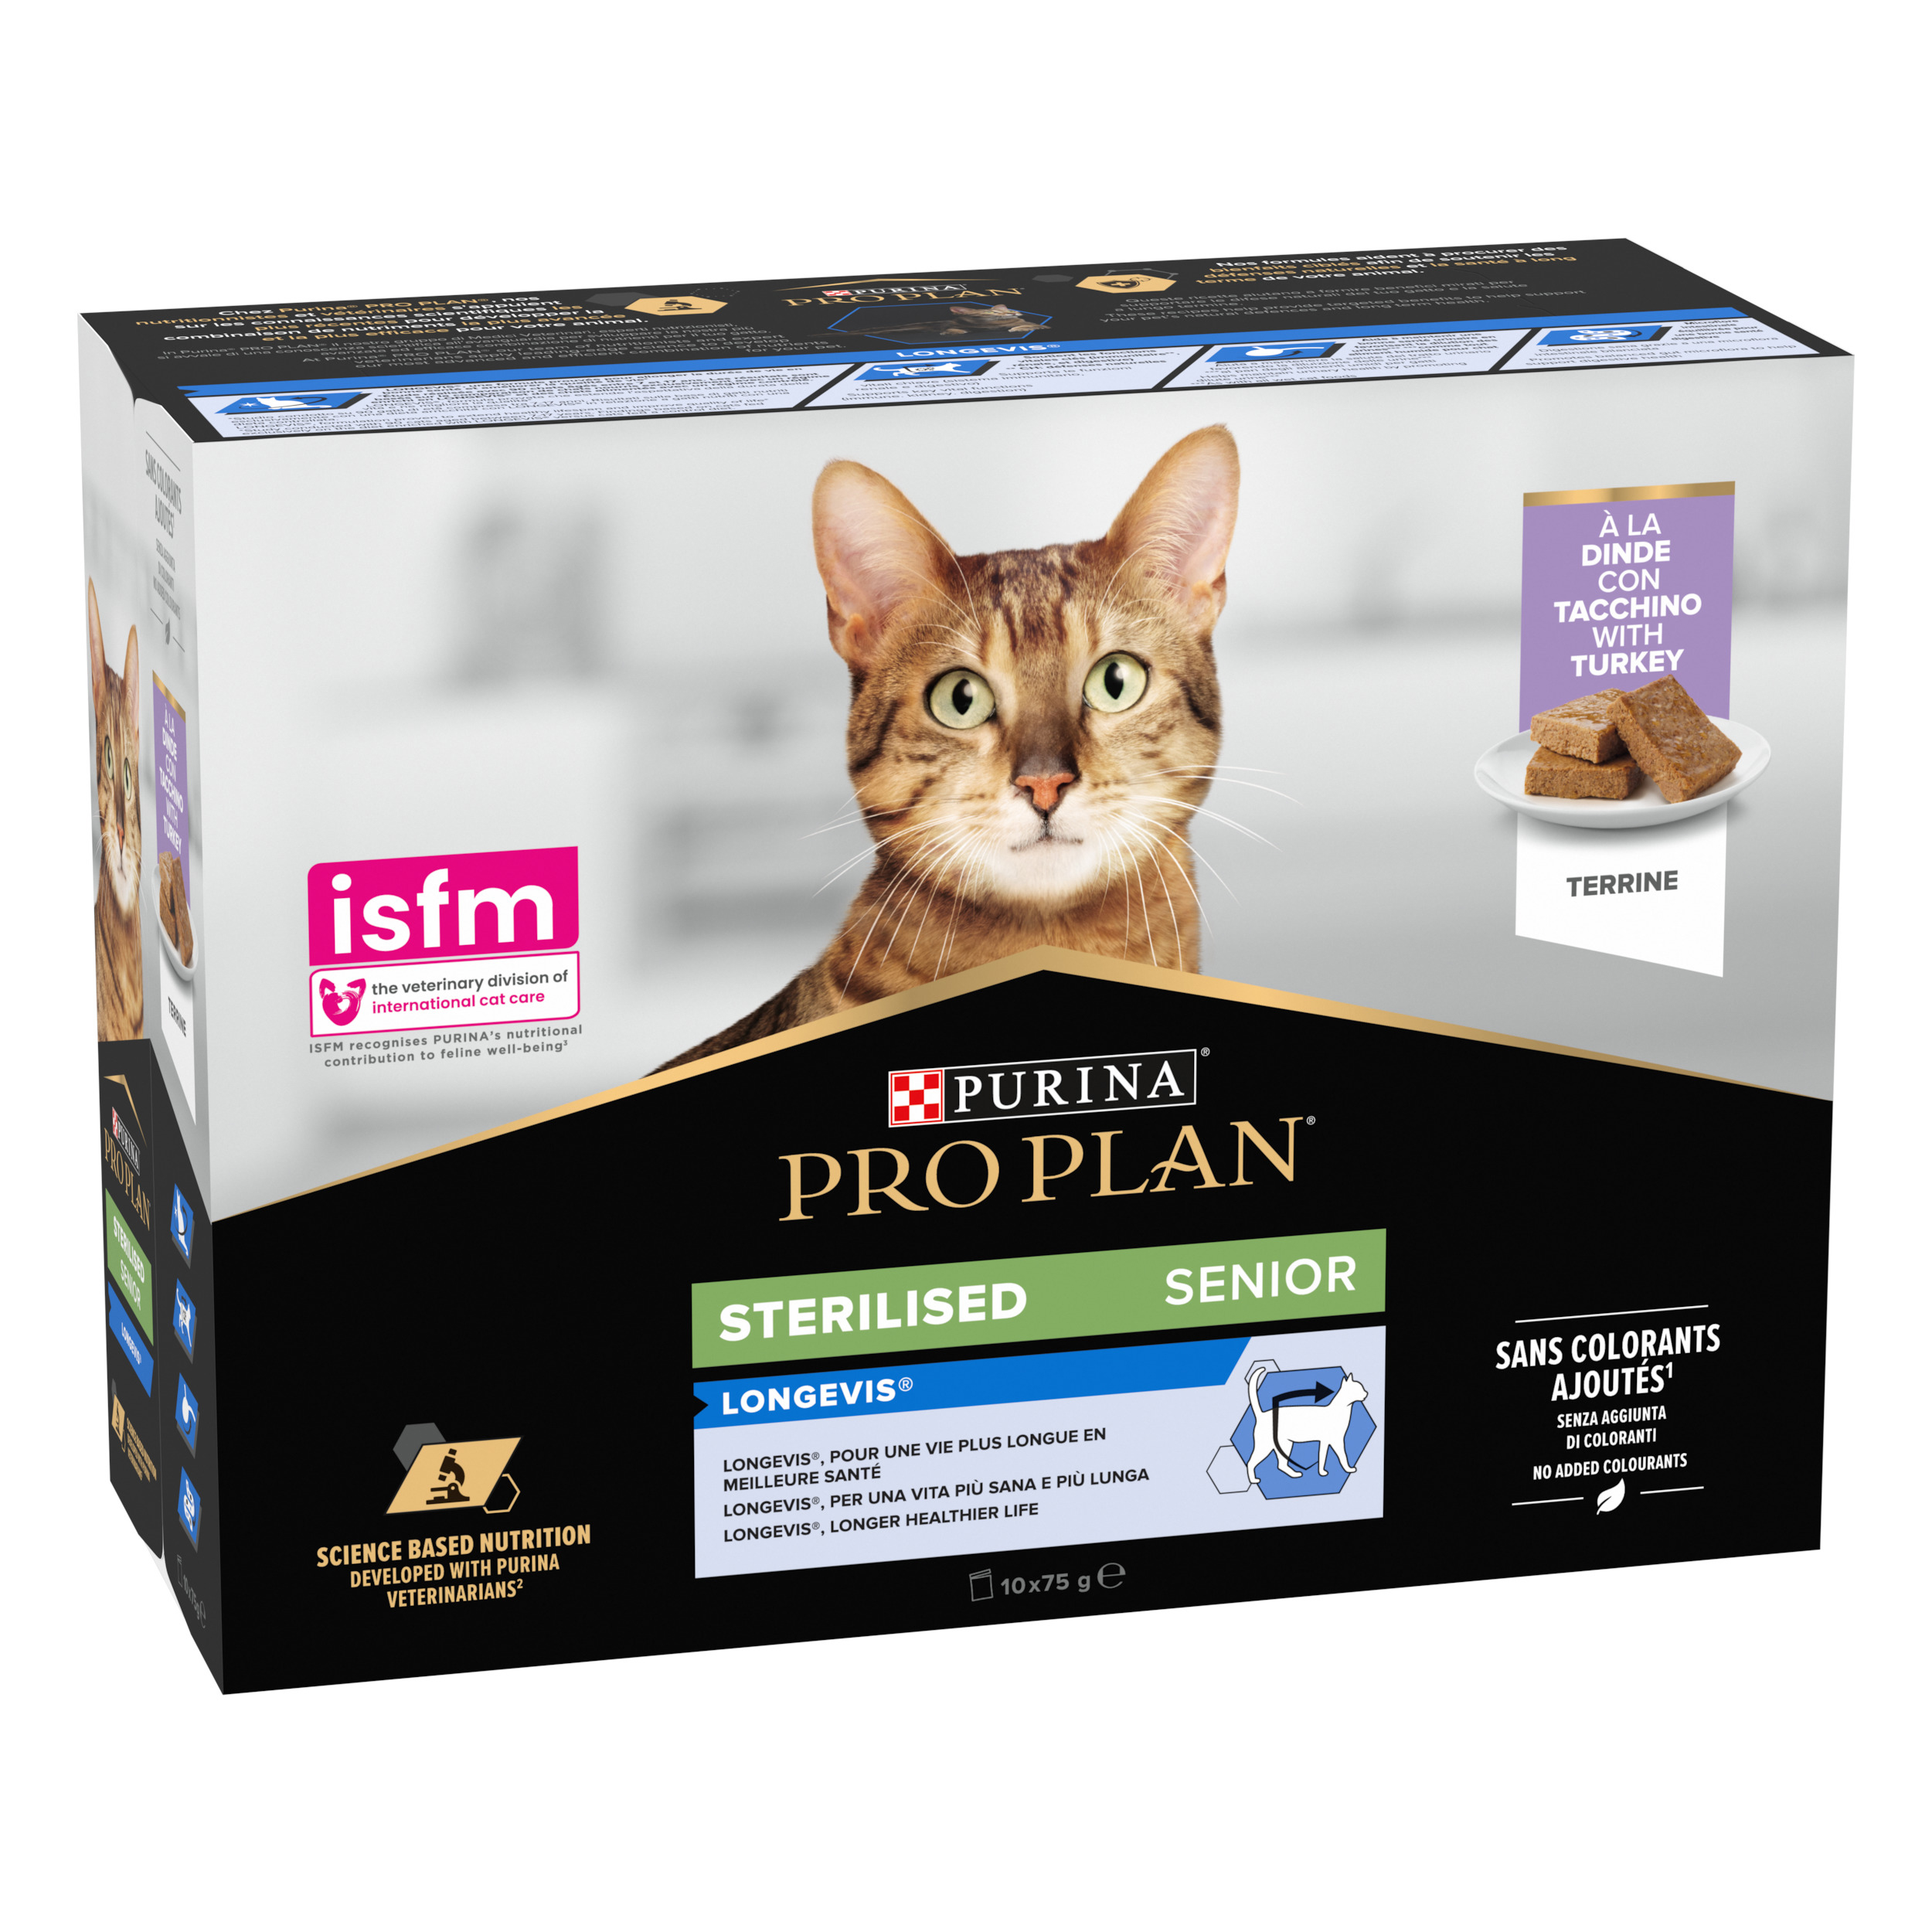 Purina ProPlan with Turkey for Sterlised Senior Cat 10x75g